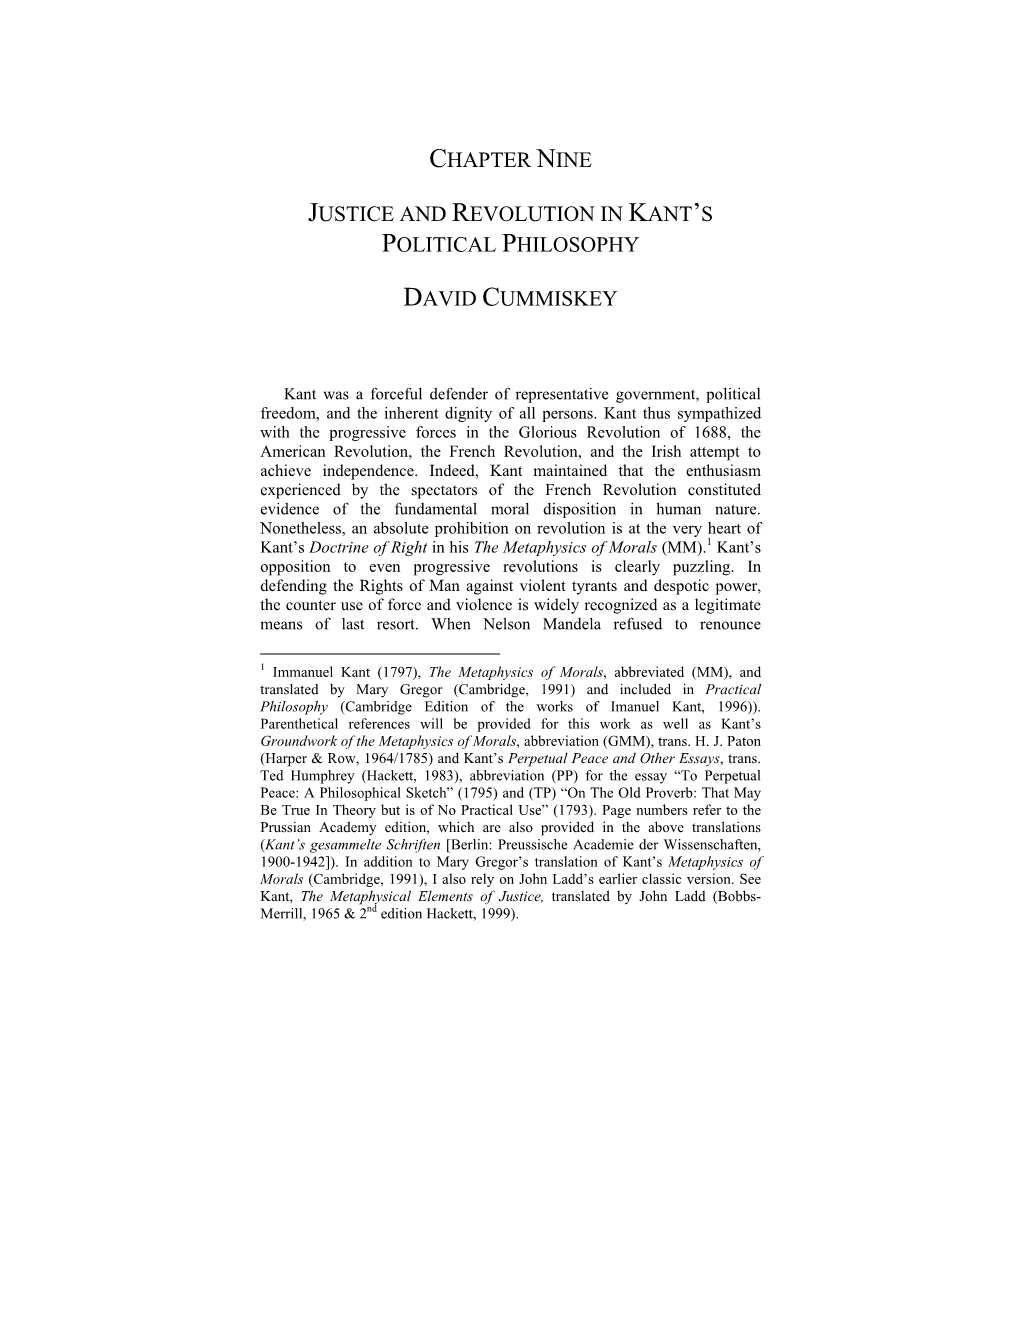 Chapter Nine Justice and Revolution in Kant's